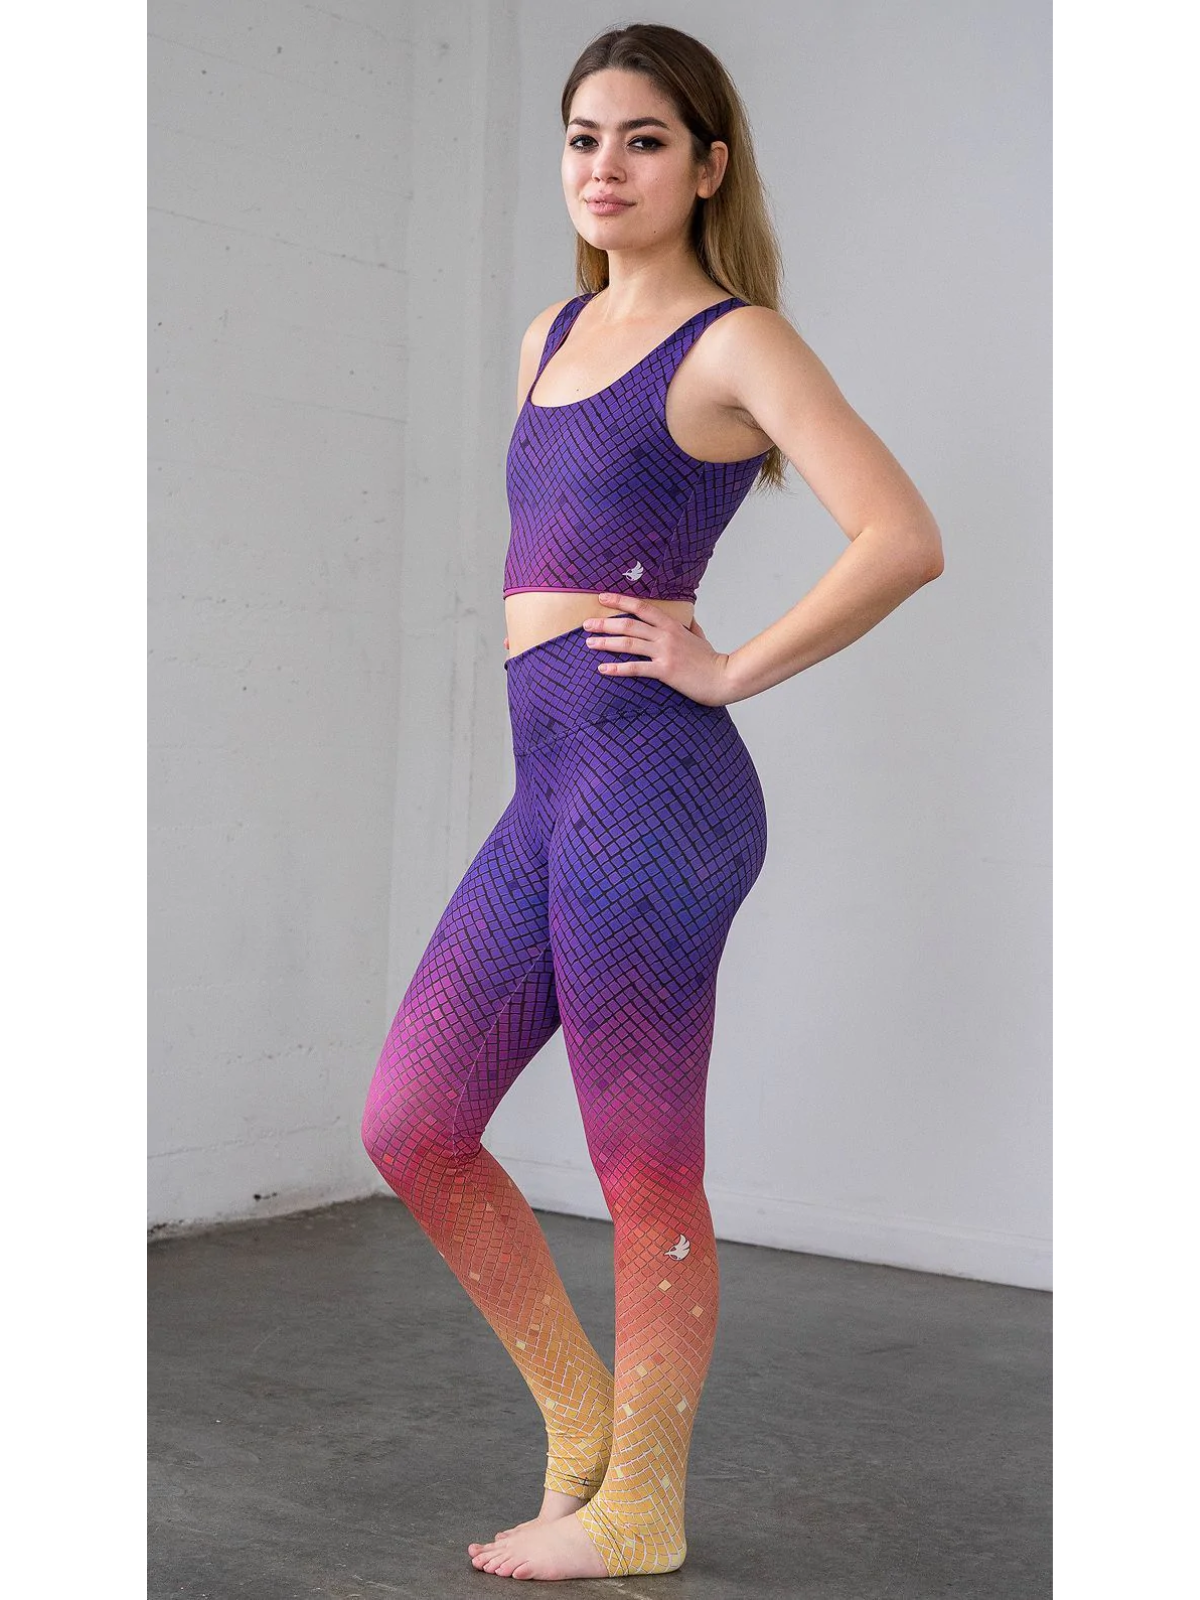 Mosaic Patch Leggings, Gym, Fitness & Sports Clothing